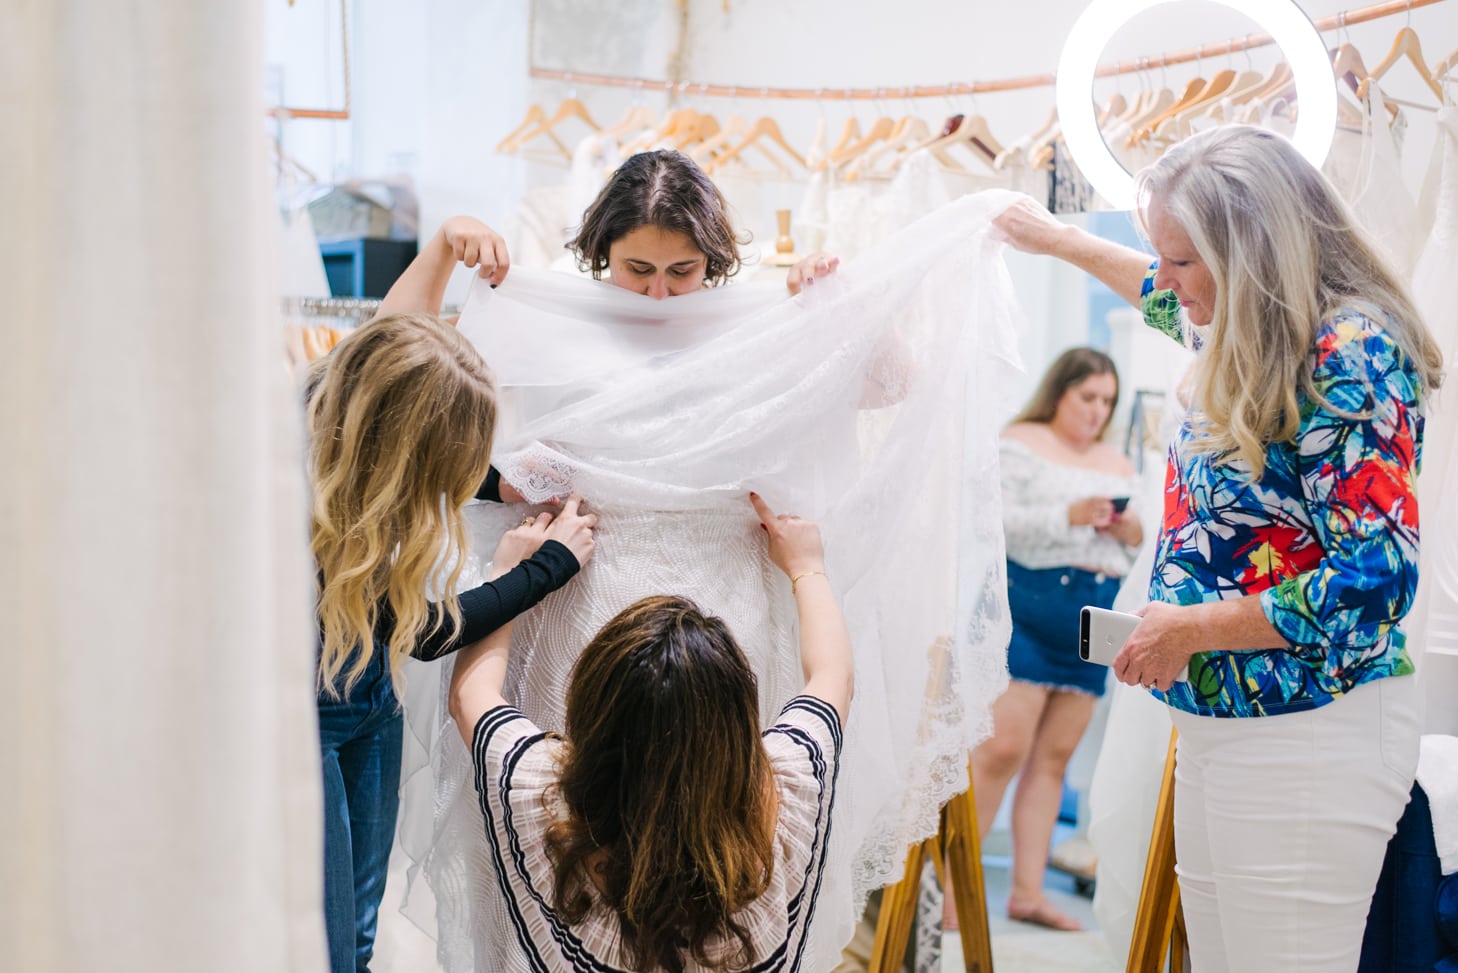 A long hair brunette woman in a striped blouse, a long hair blonde woman and a woman with long grey hair helping plus size woman with short grey hair fix her lace wedding dress in front of plus size woman in short jean skirt and lace blouse on the phone and wedding dresses hanging on wooden hangers 